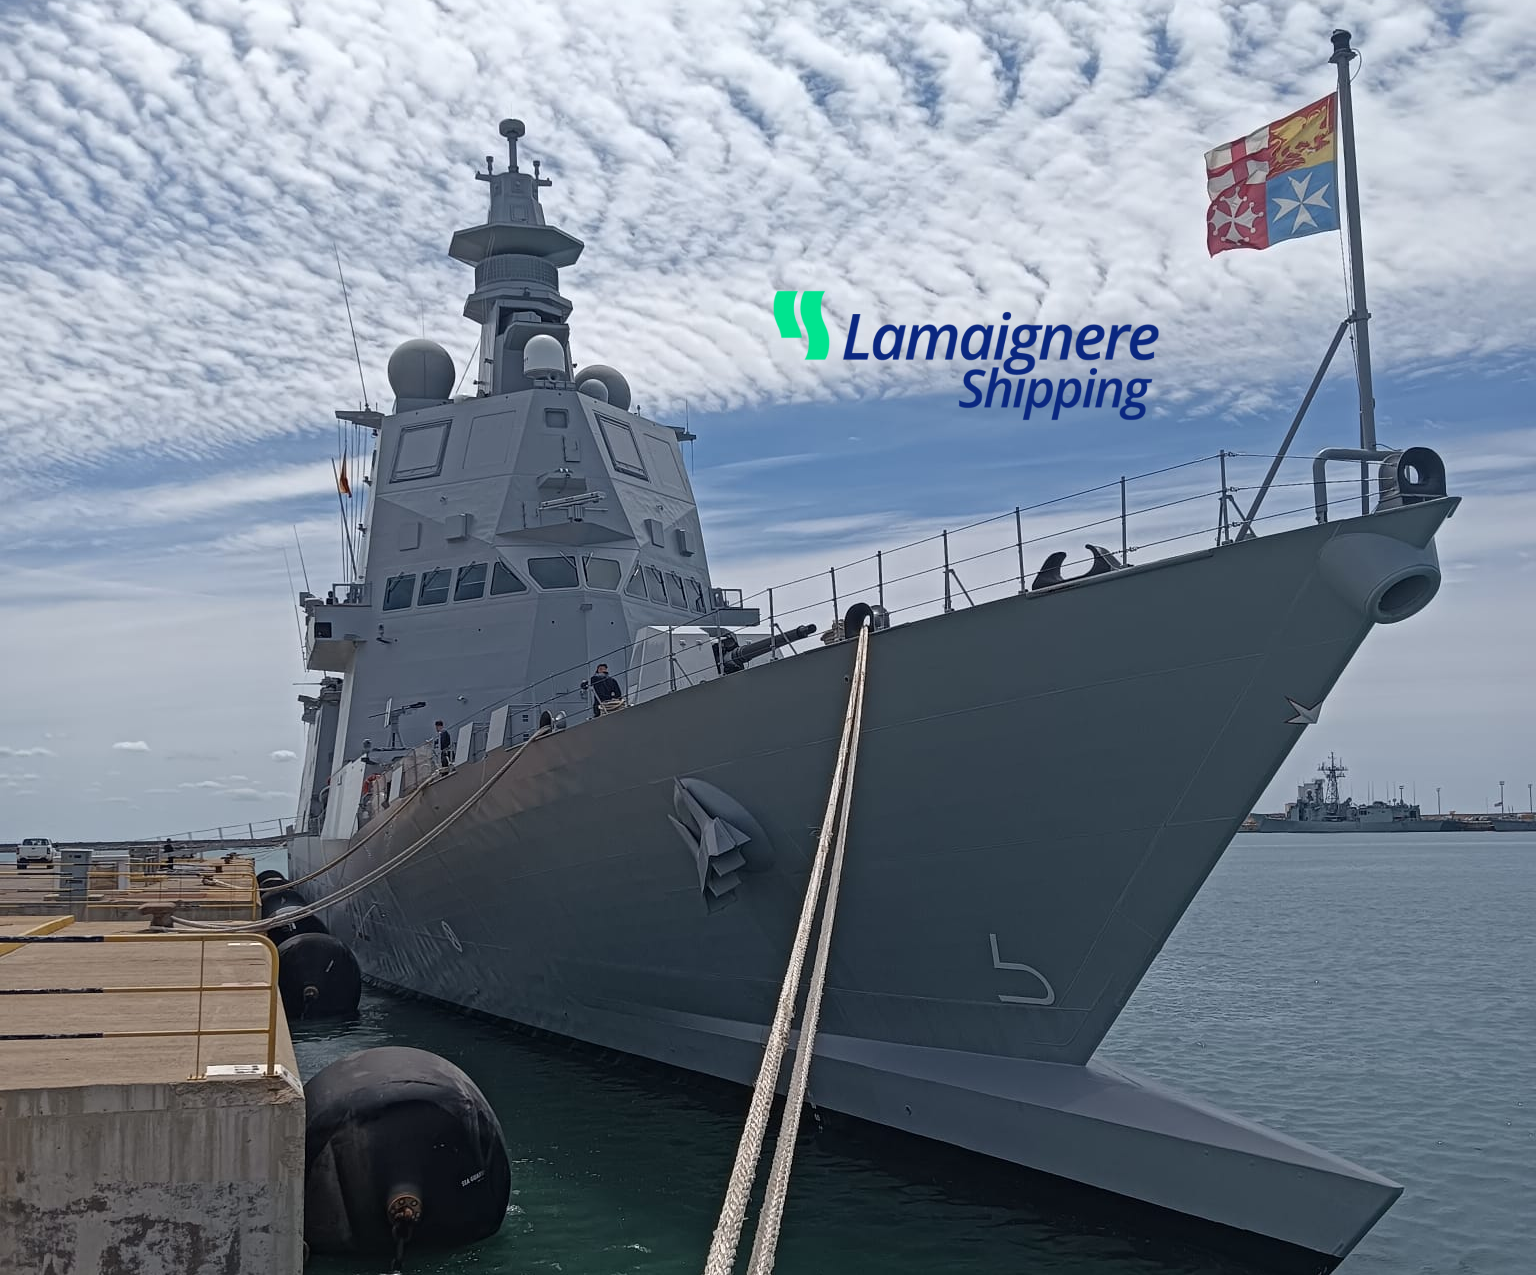 Lamaignere Shipping coordinates a technical call at the Port of Rota for the vessel ITS Montecuccoli